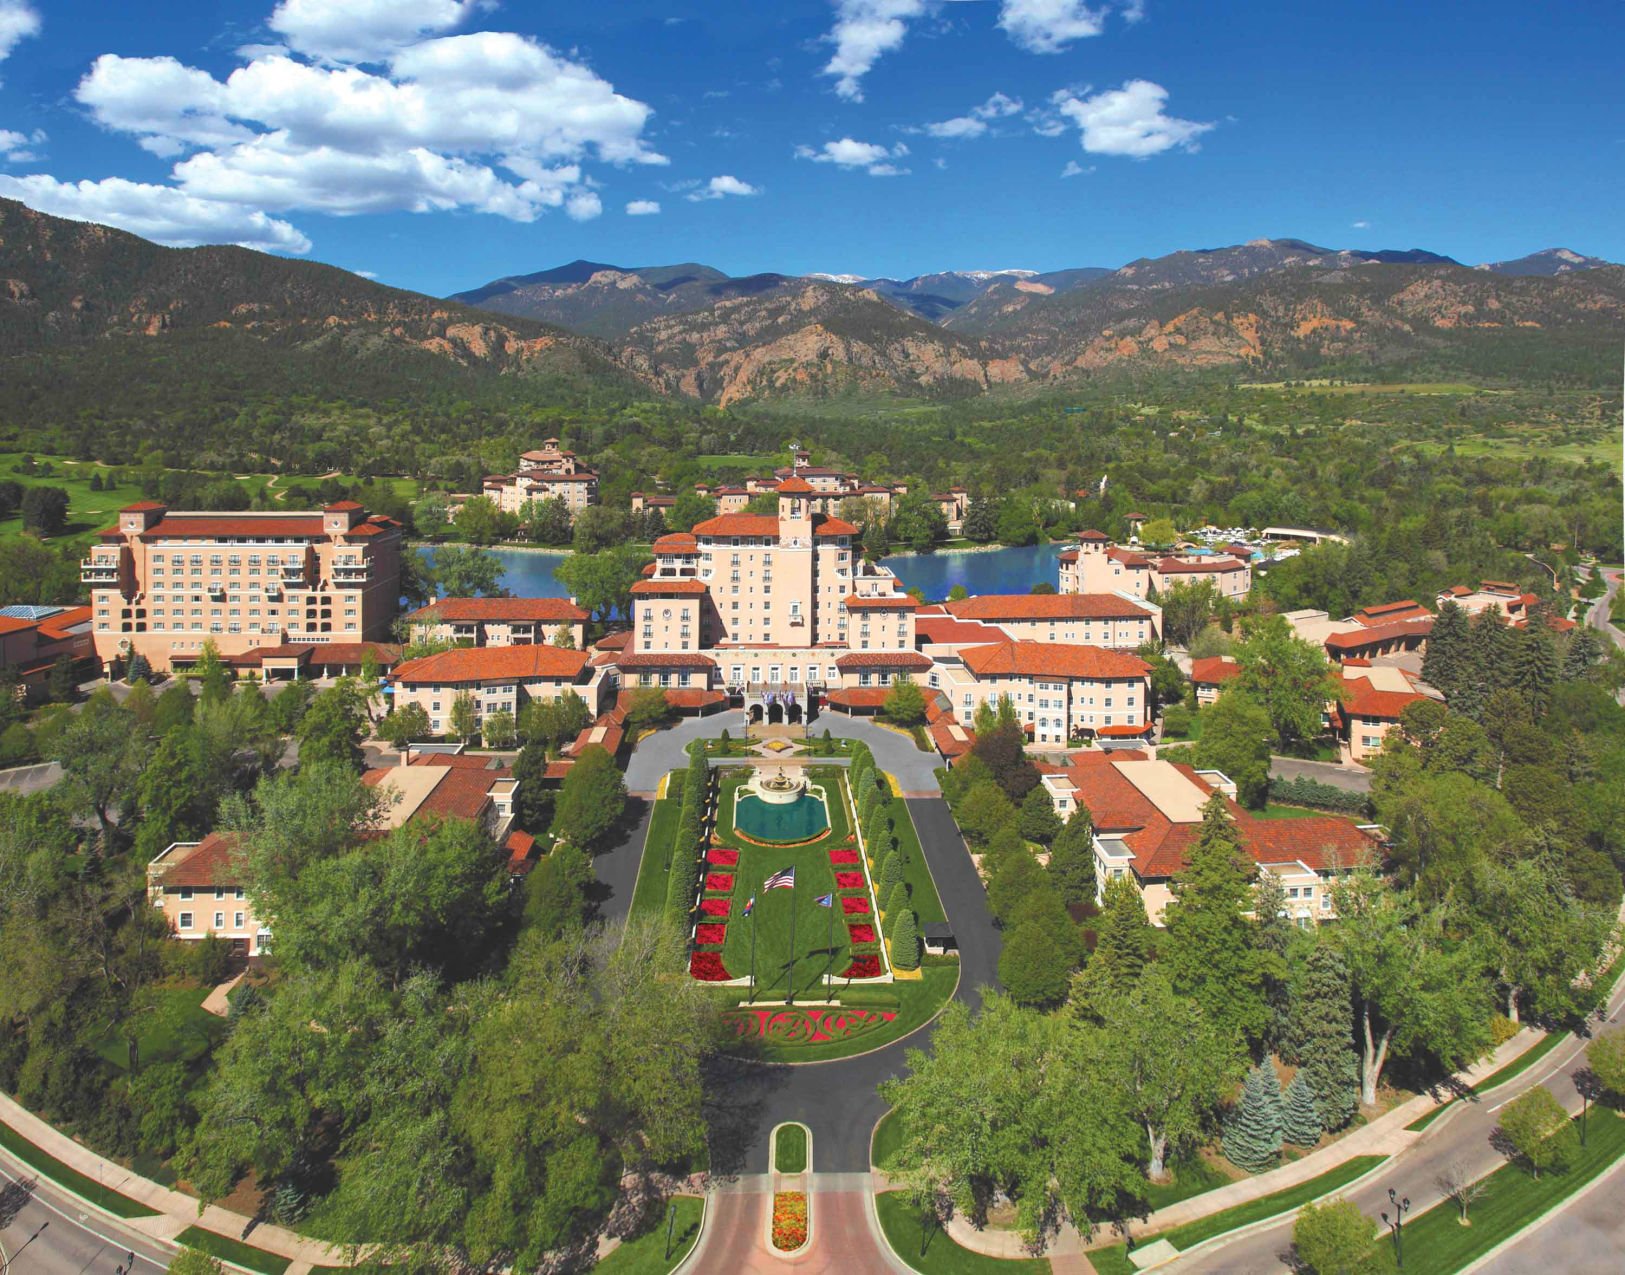 Broadmoor Family Friendly Hotel Review, Broadmoor with Kids